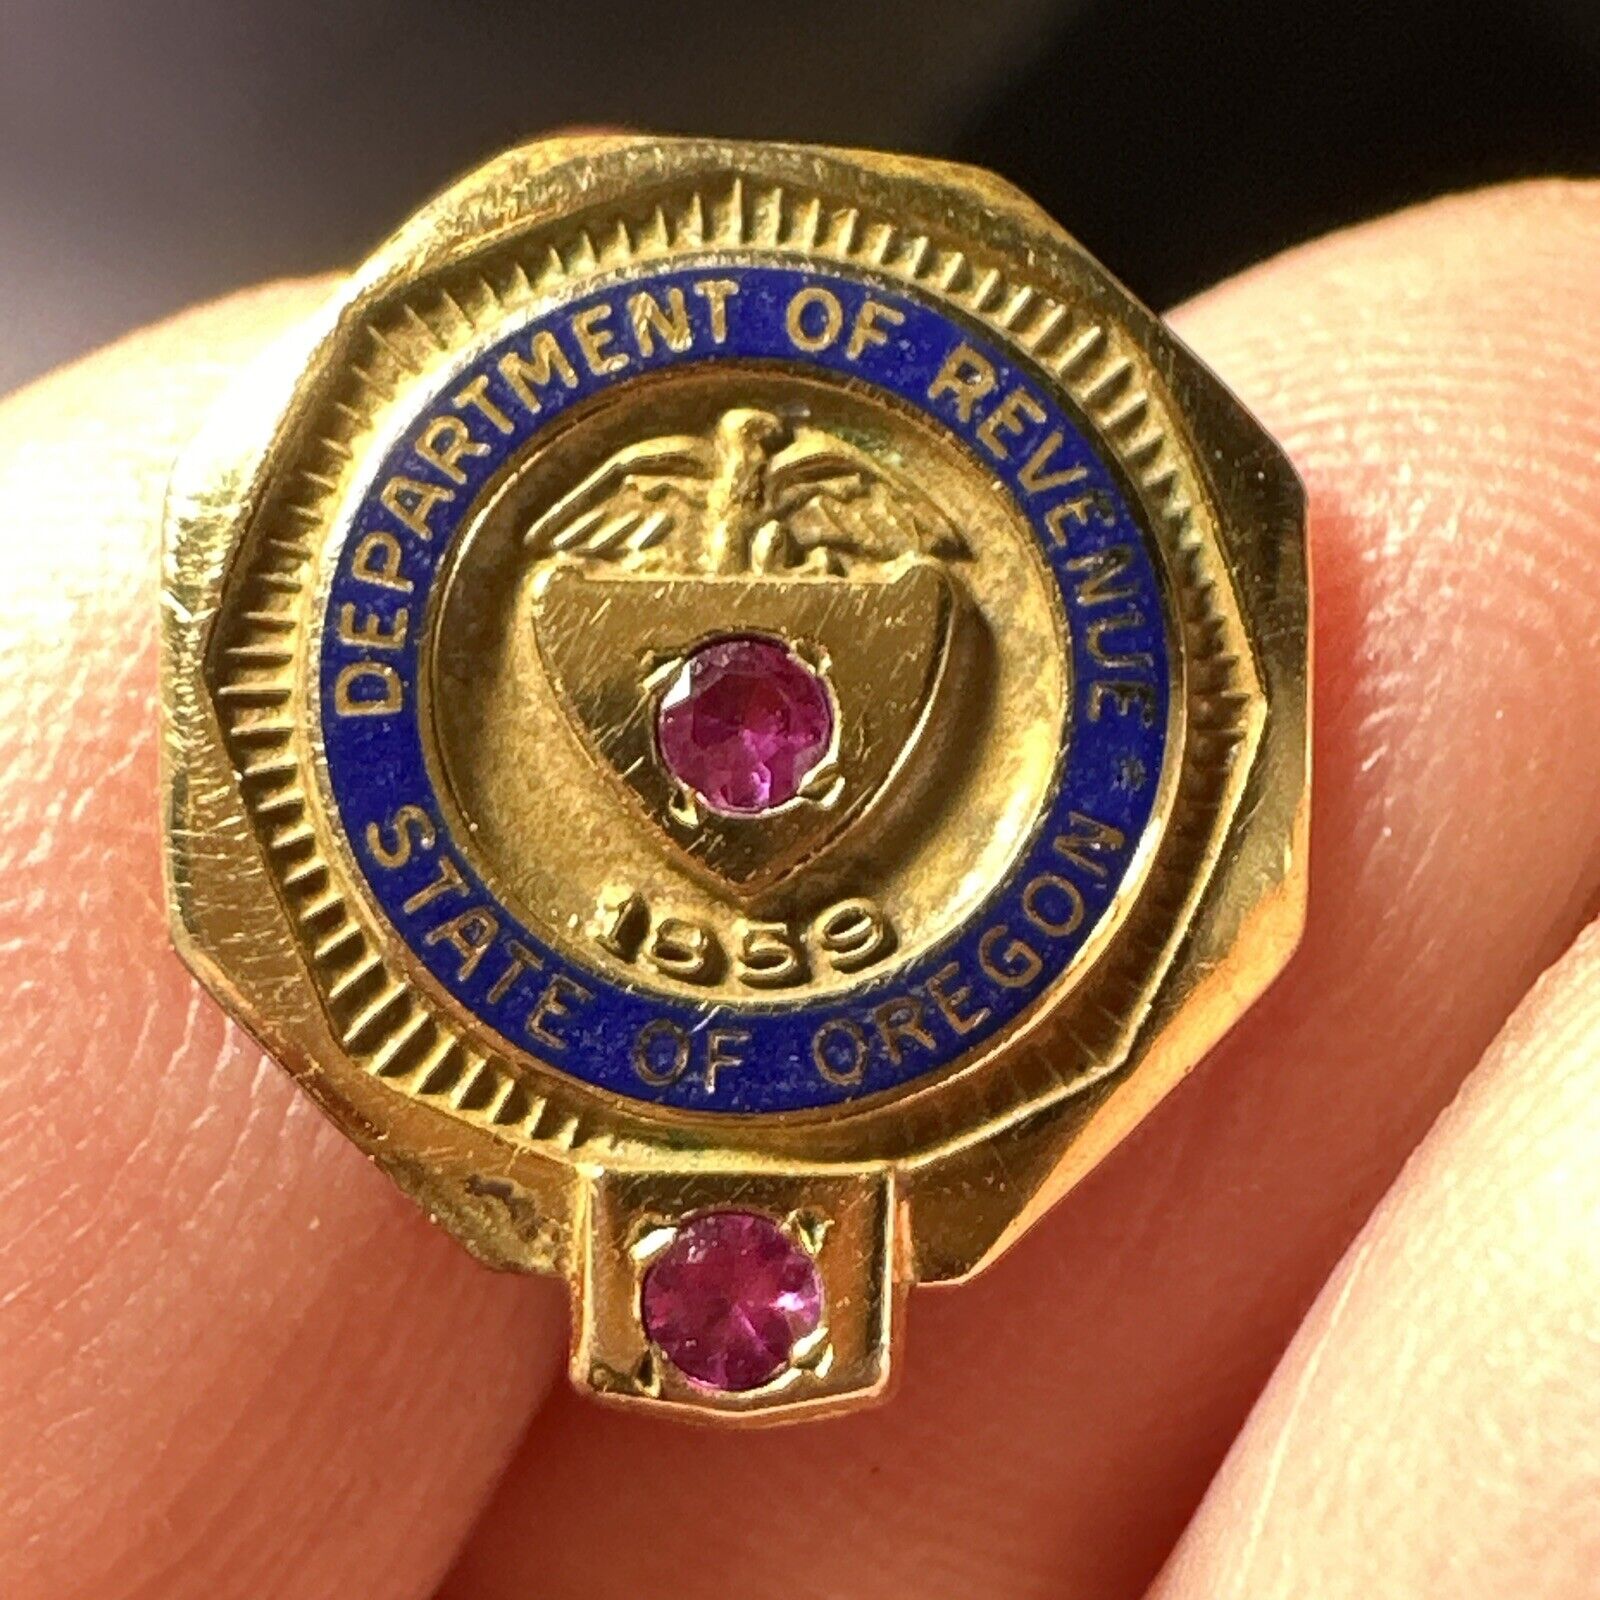 LGB 1/10 10k Yellow Gold 1859 department of revenue Ruby pin